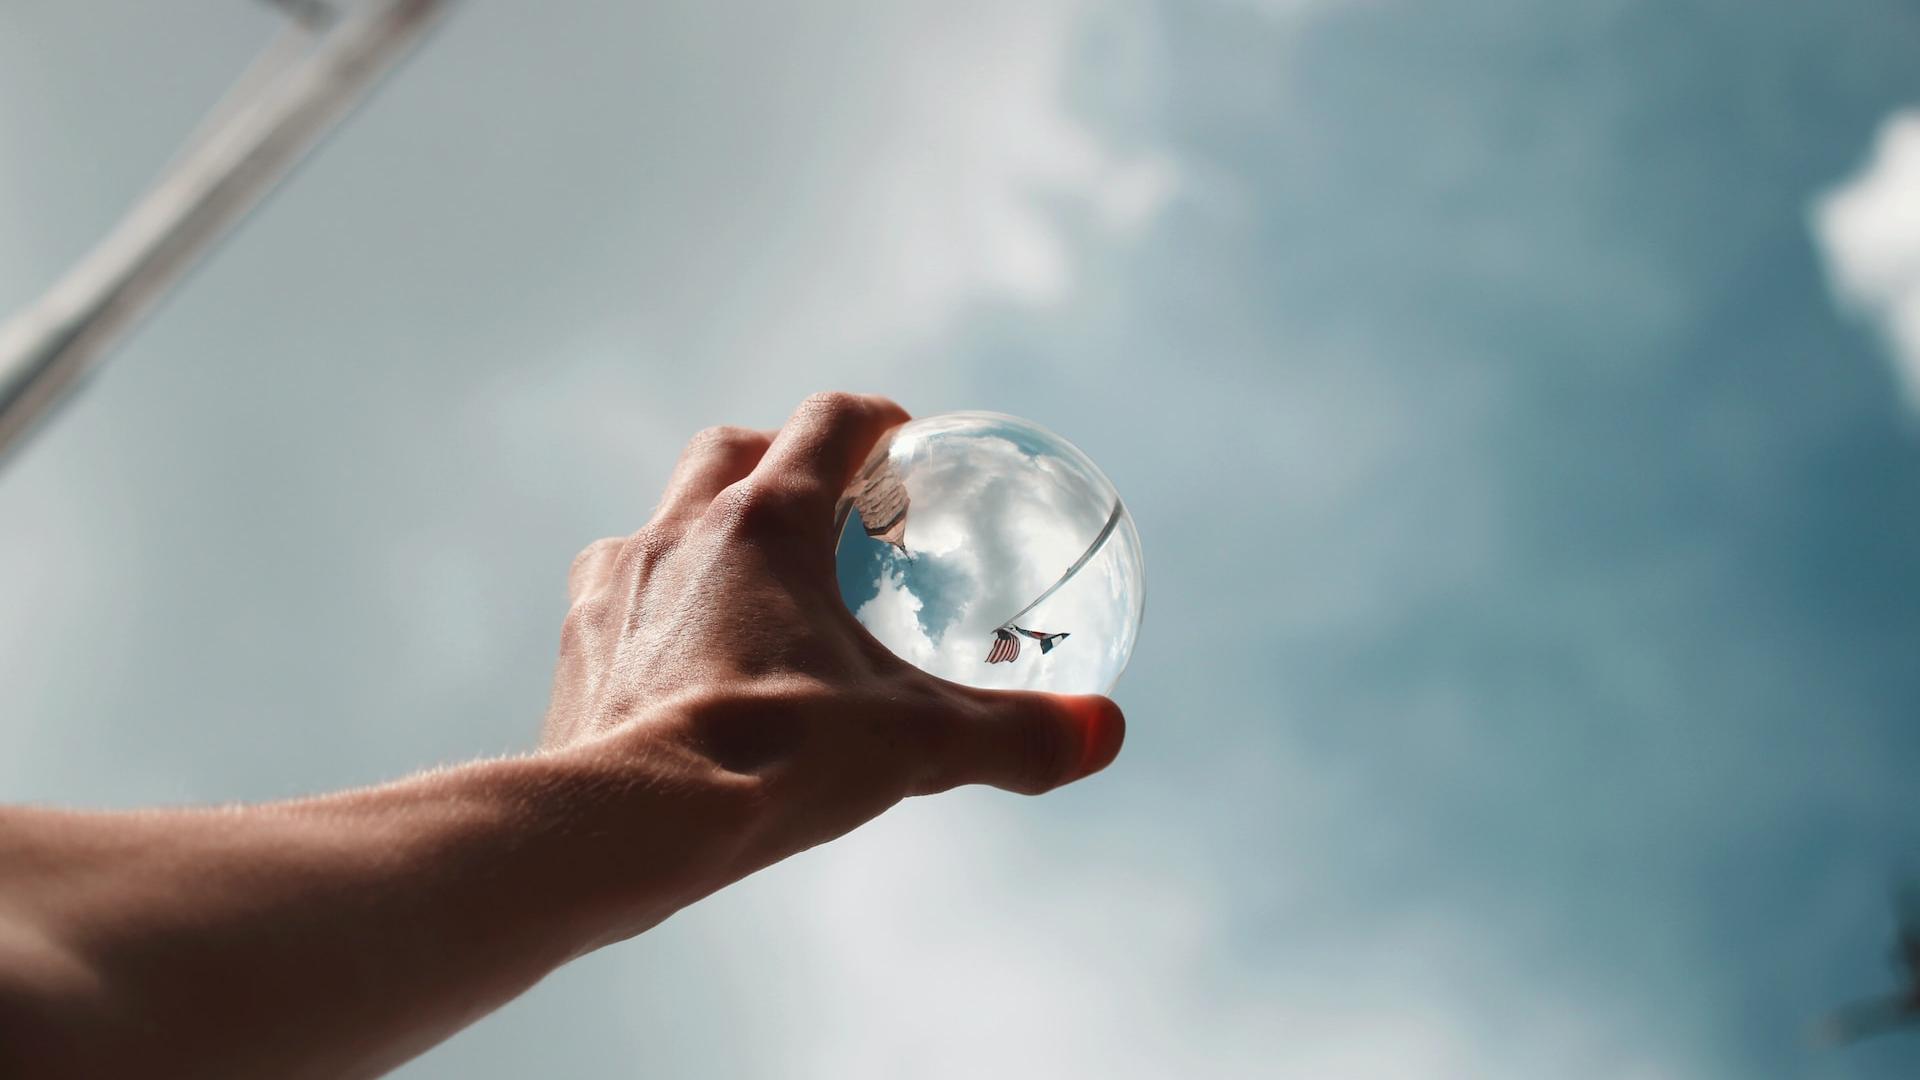 A man's hand holding a glass sphere to the skies which reflects the surroundings in a skewed manner